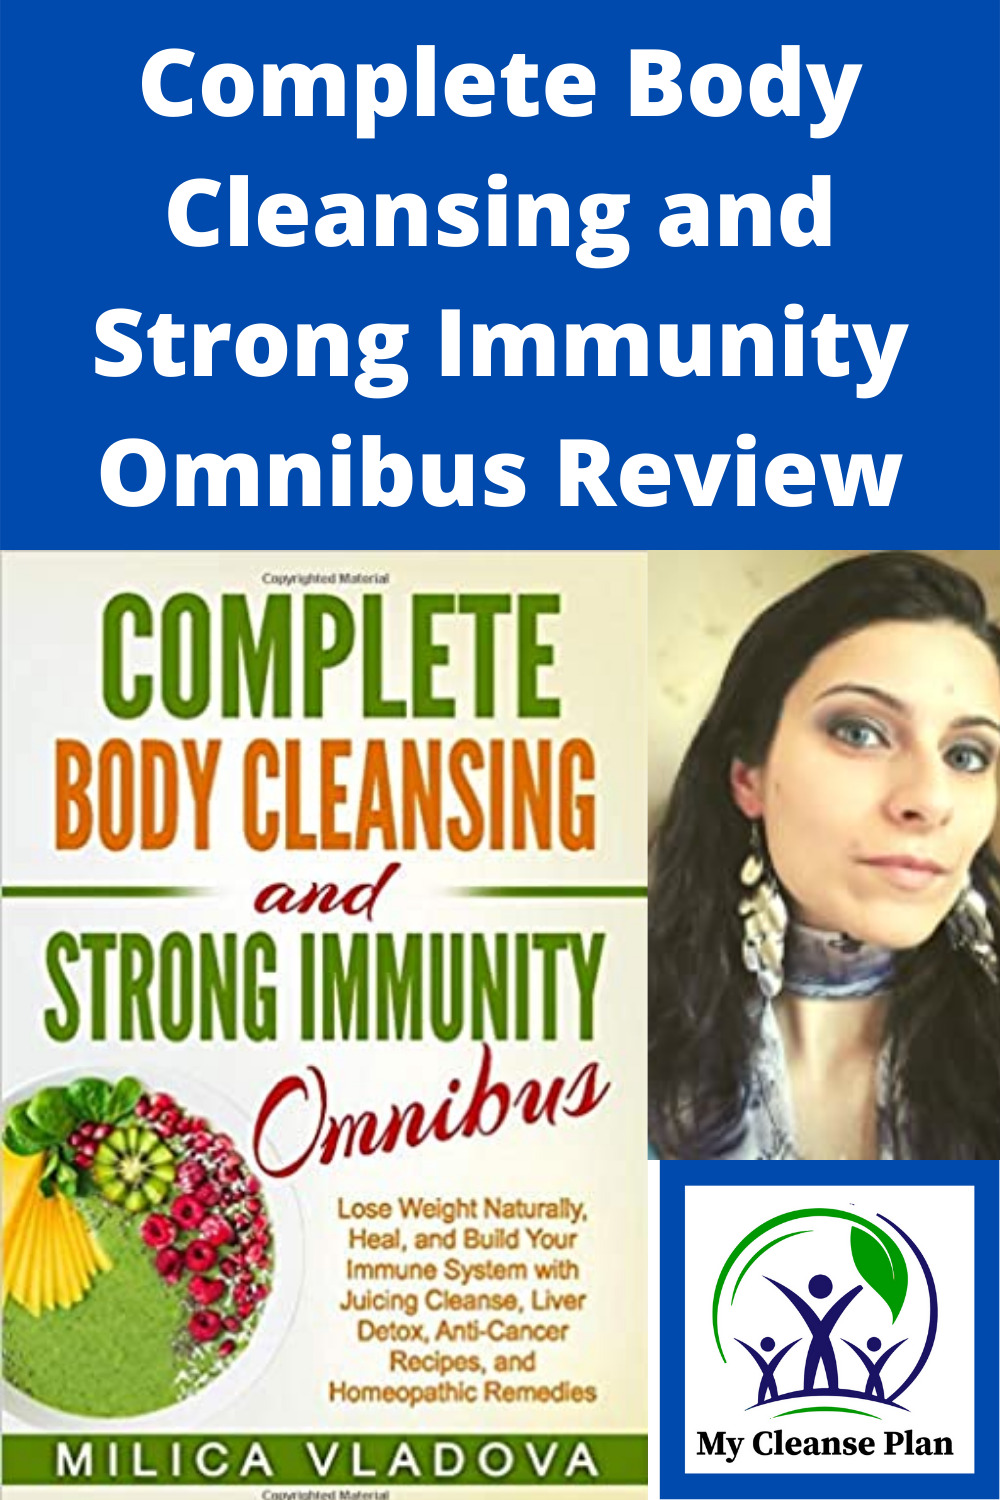 Complete Body Cleansing and Strong Immunity Omnibus Review